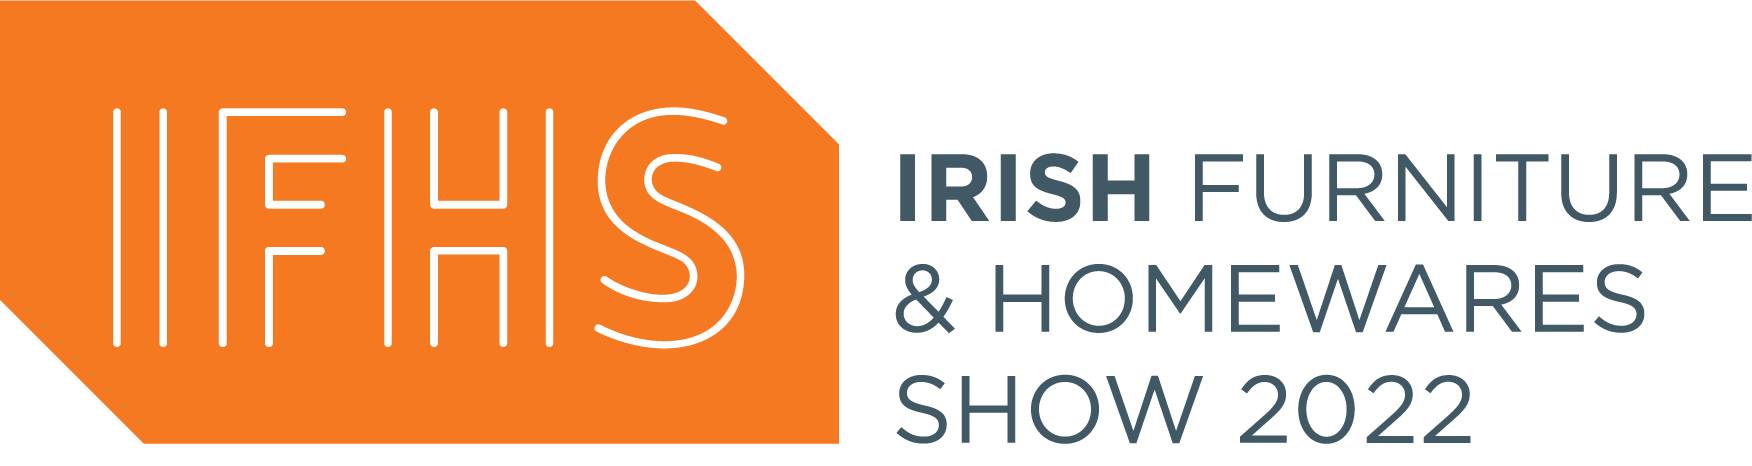 Gary Corcoran voted Best Sales Rep by Irish Retailers  - IFHS Tradeshow